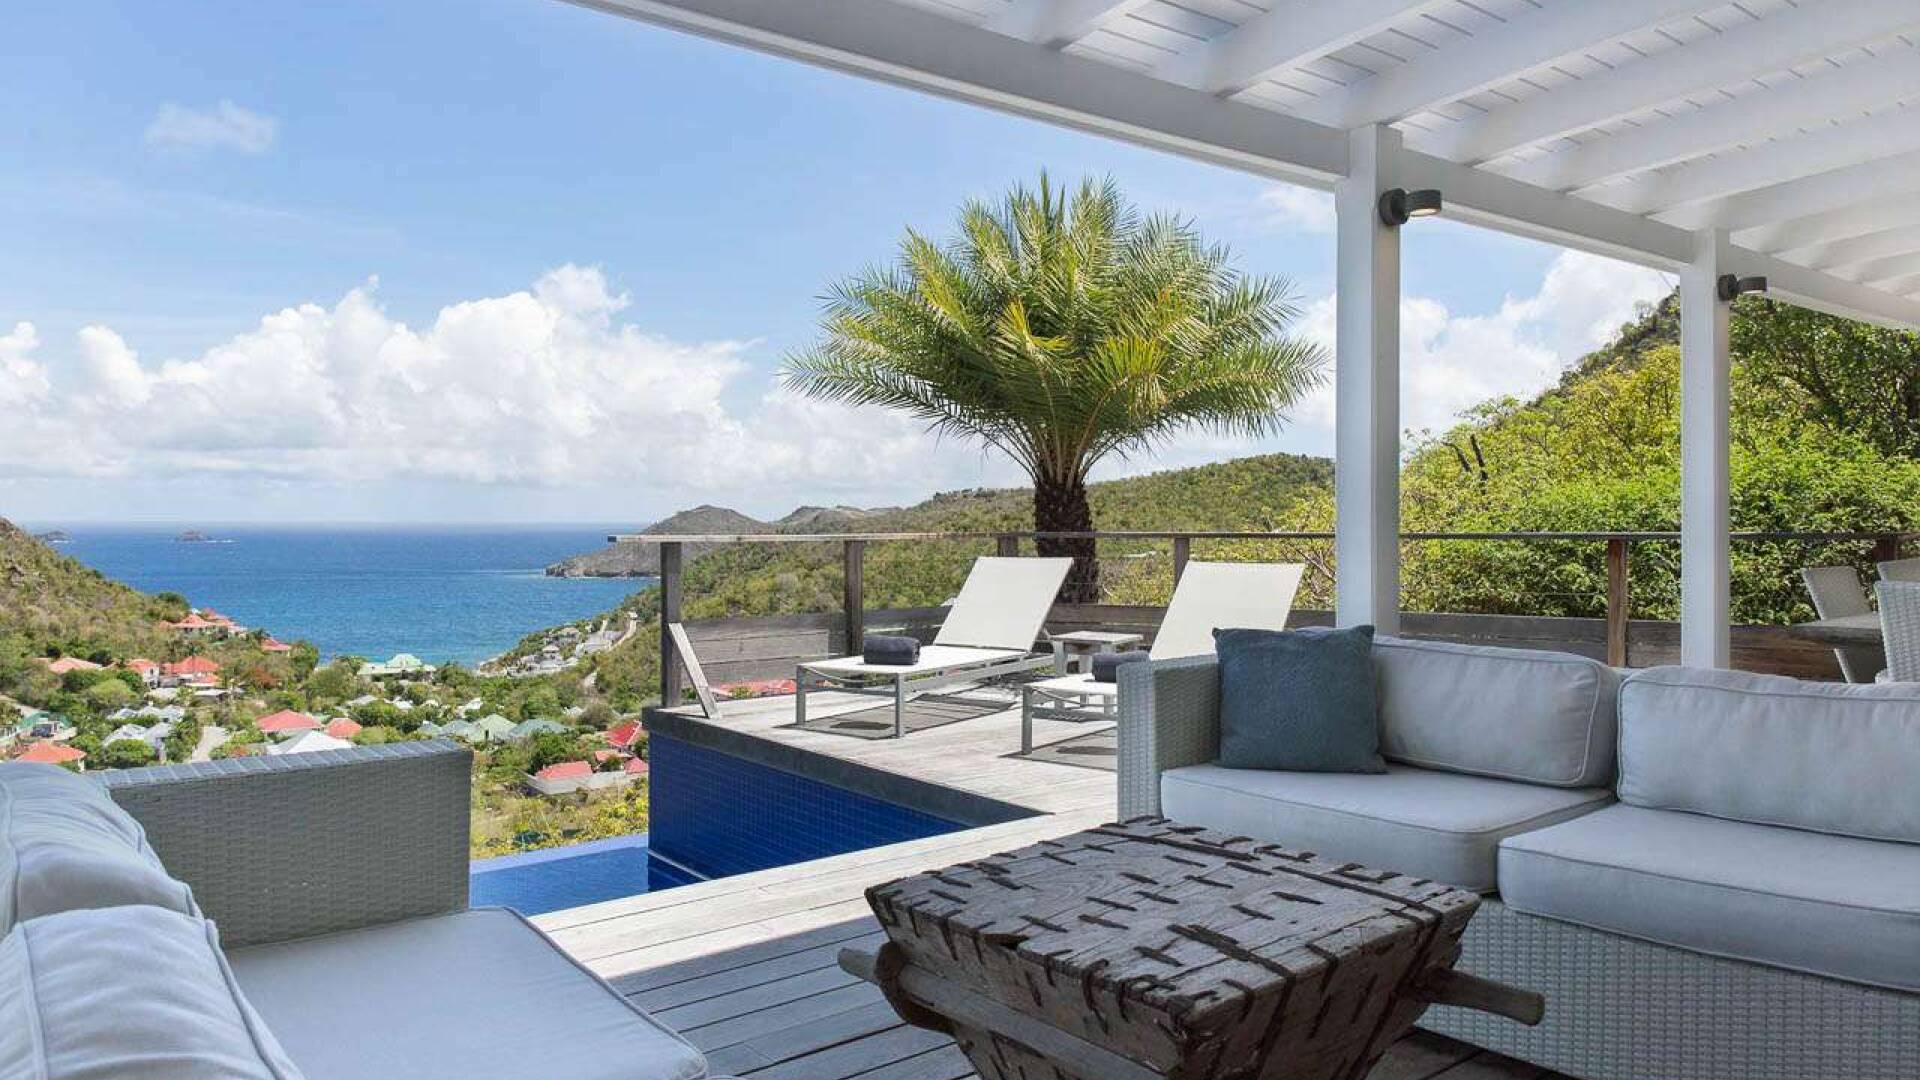 Terrace at WV RIV, Flamands, St. Barthelemy